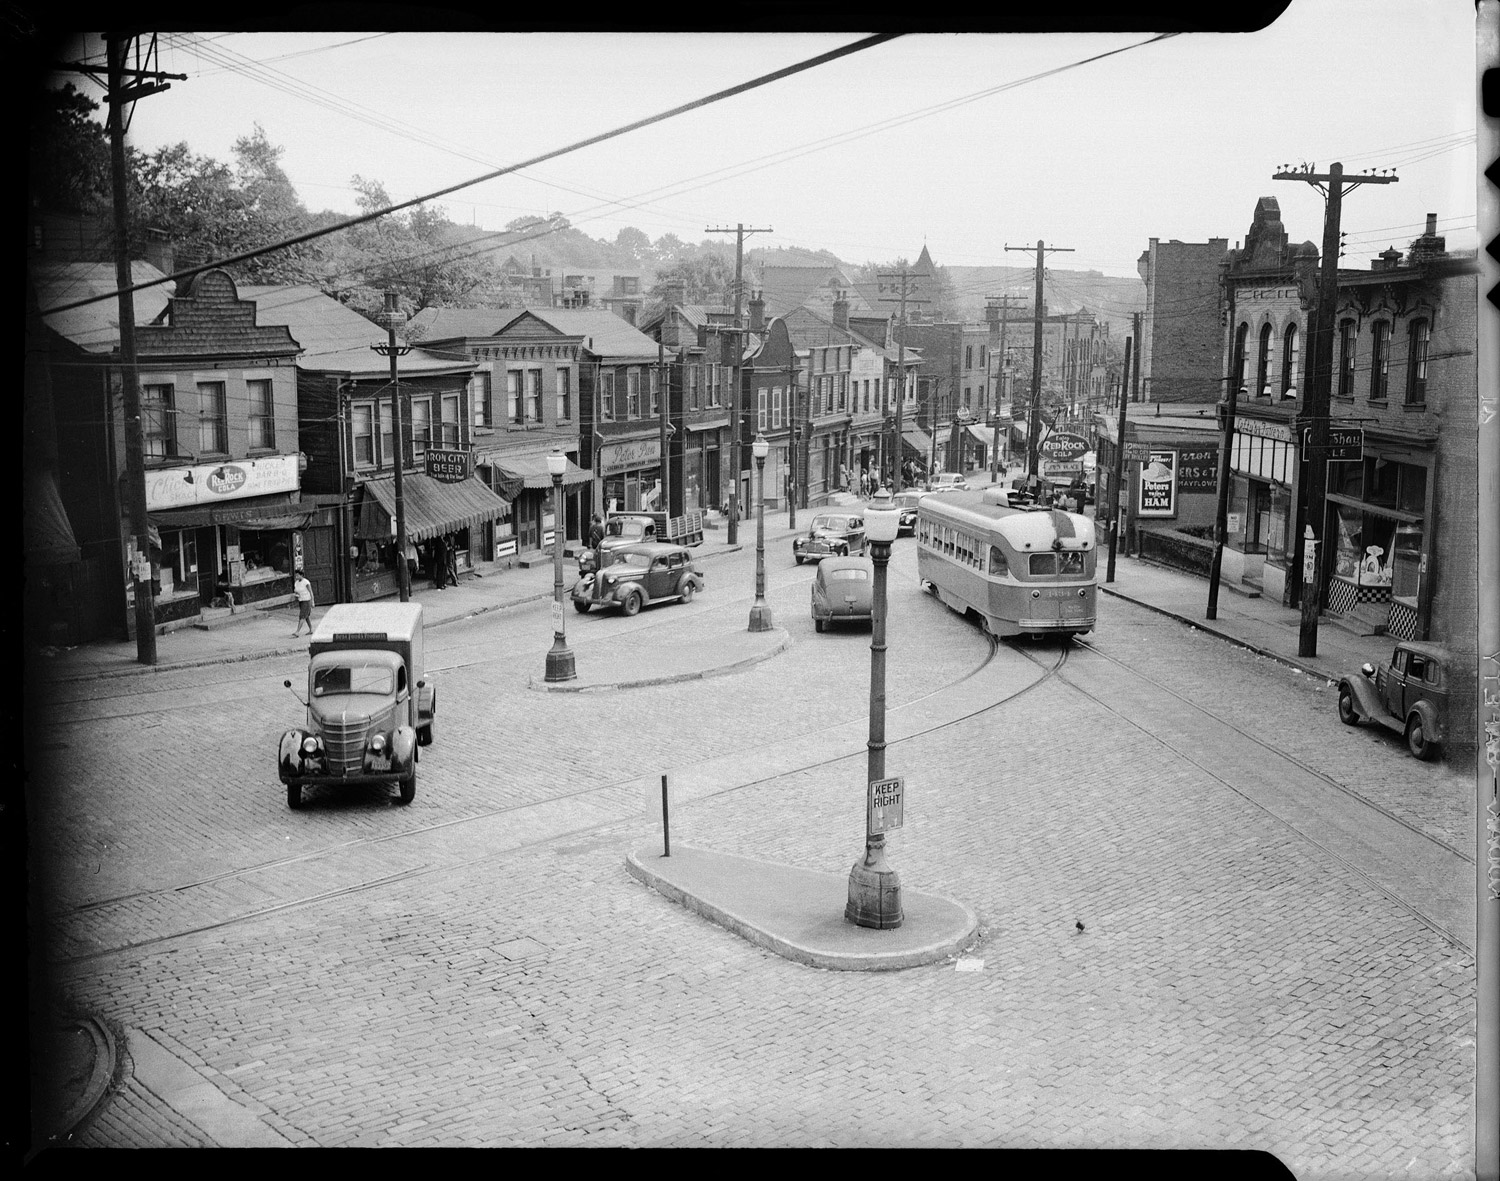 Herron Avenue at the intersection of Milwaukee Street in the Hill District, 1938-1945.